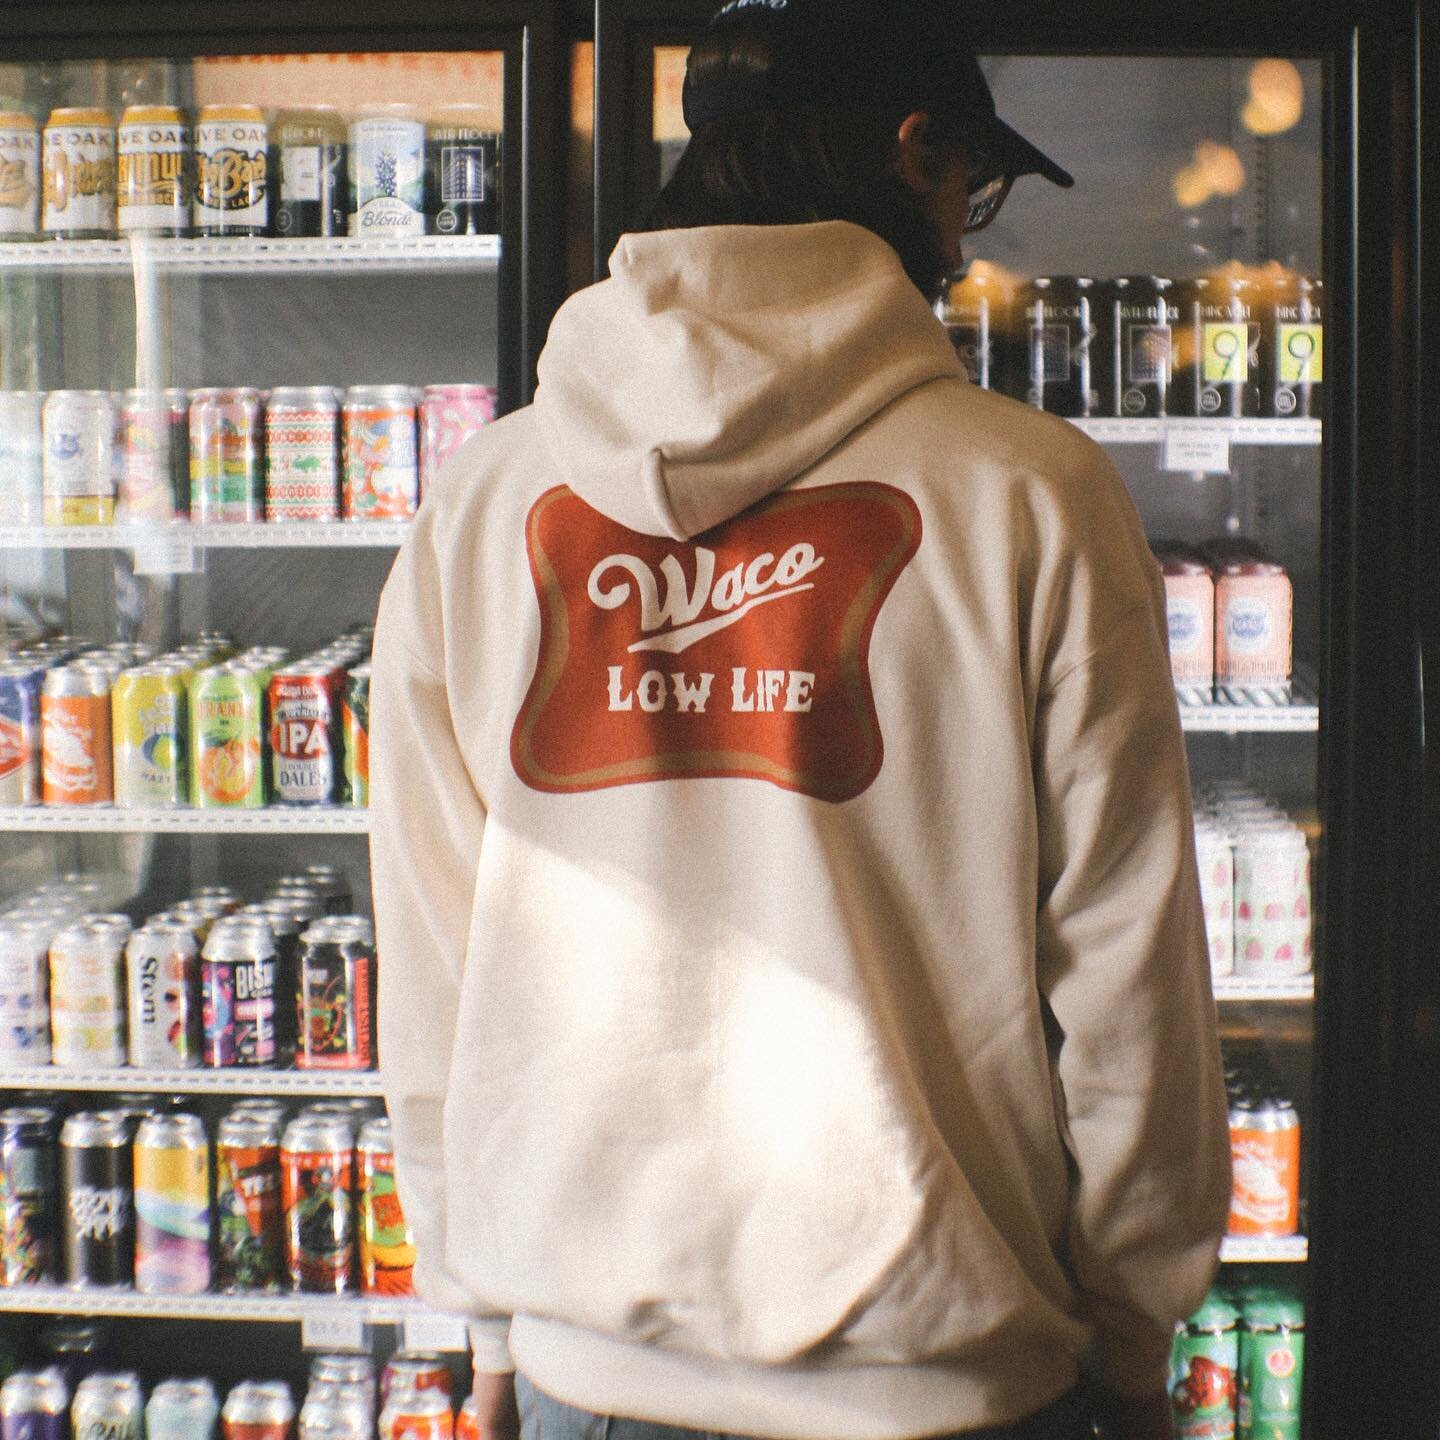 Your fav Waco Low Life print in a hoodie. With a vintage fit, kangaroo pouch, &amp; hoodie w/ drawstrings, this riff on our favorite beer will keep you cozy on a cold day.
In the shop &amp; online now 🍻